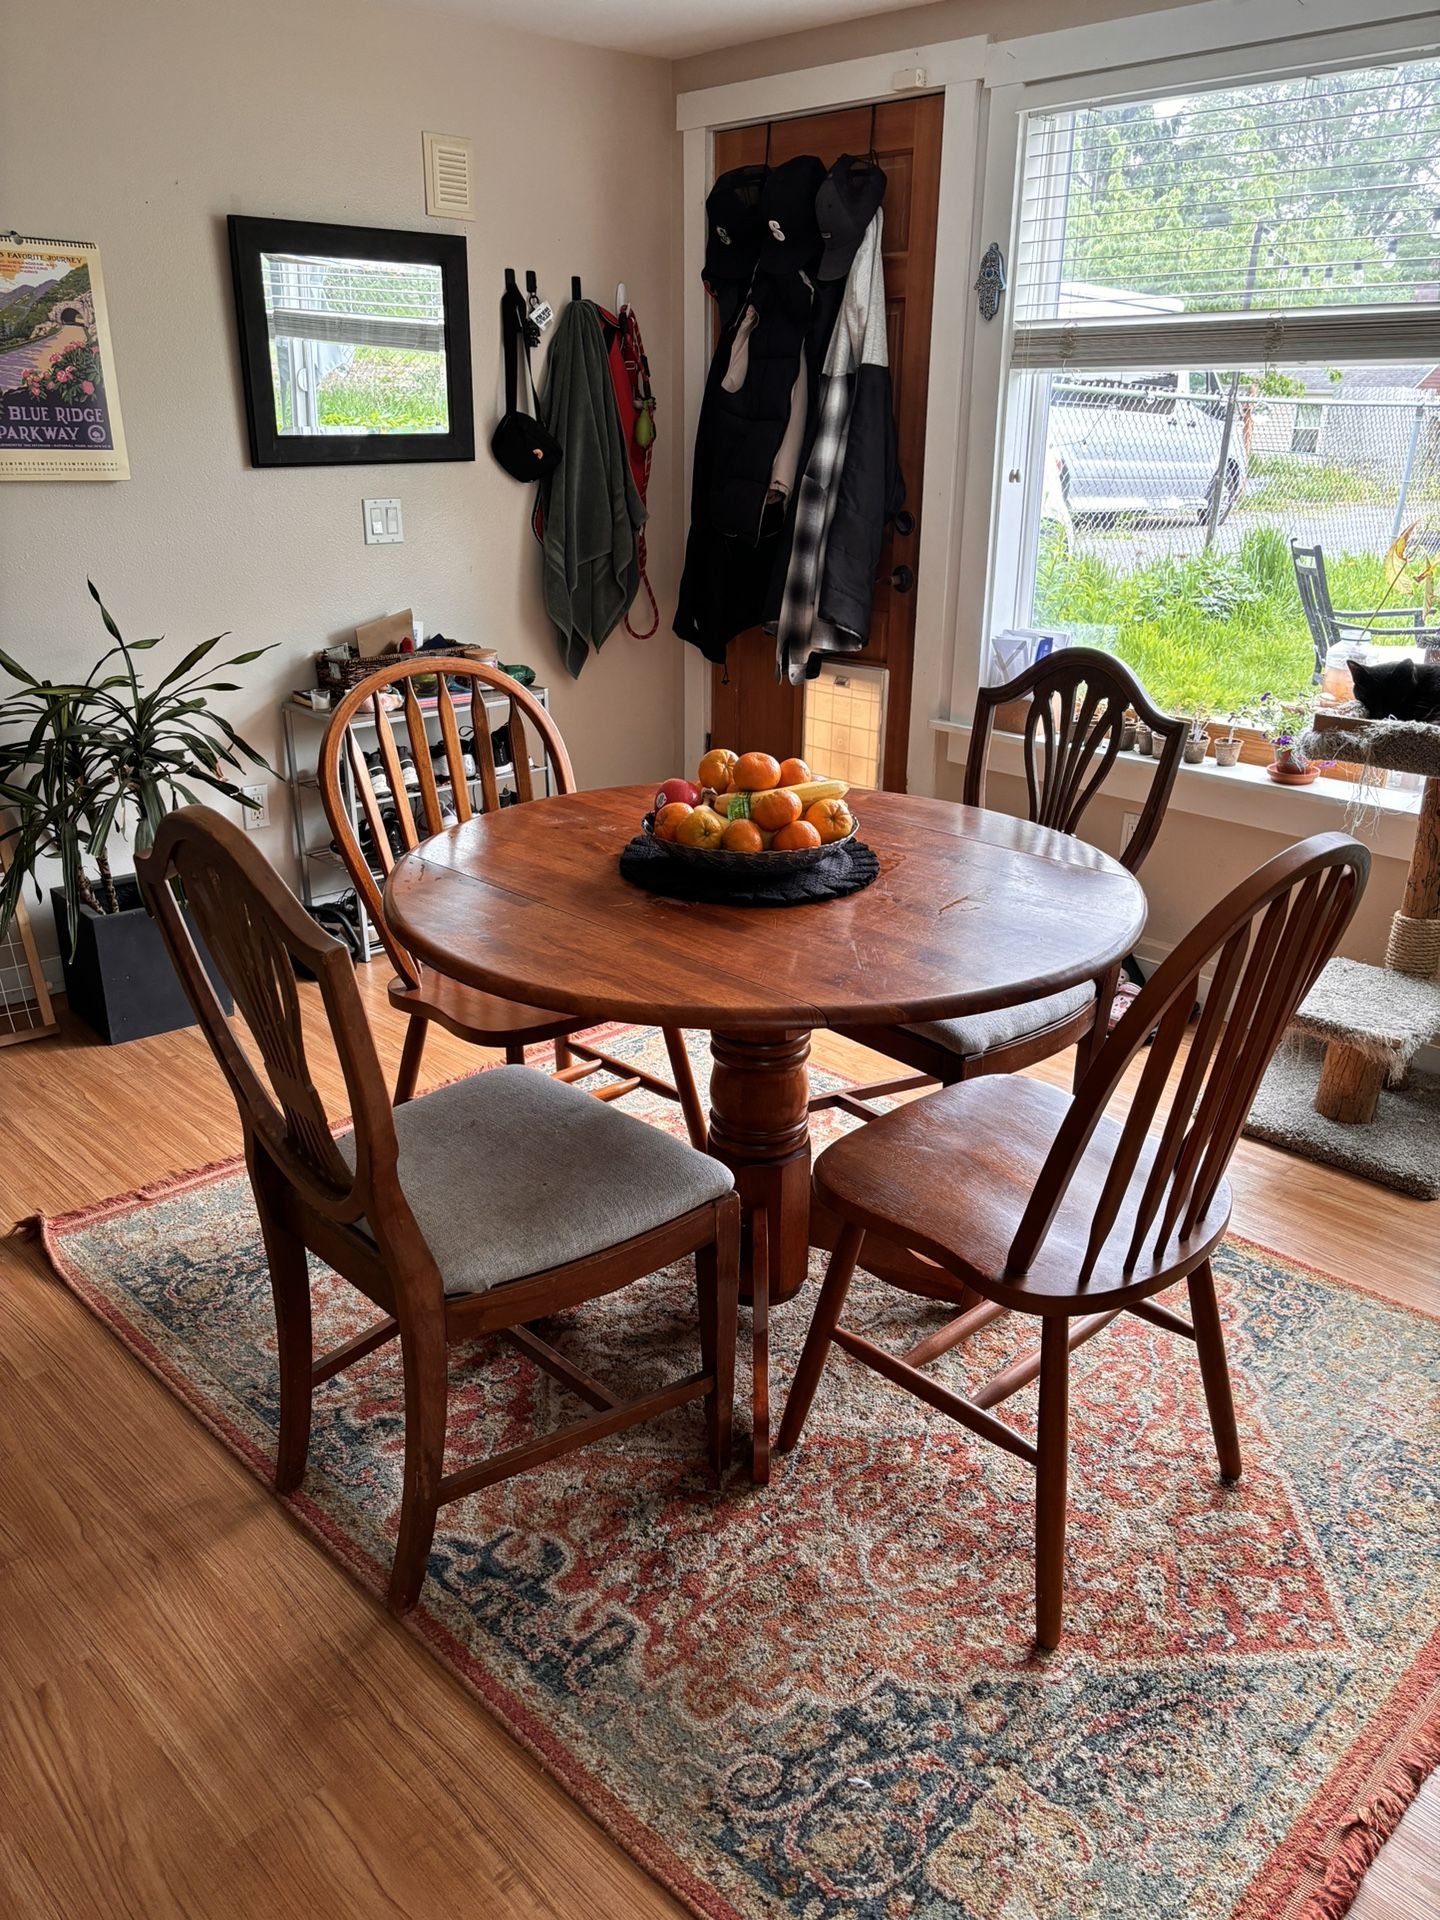 Round Wood Dining Table with Chairs